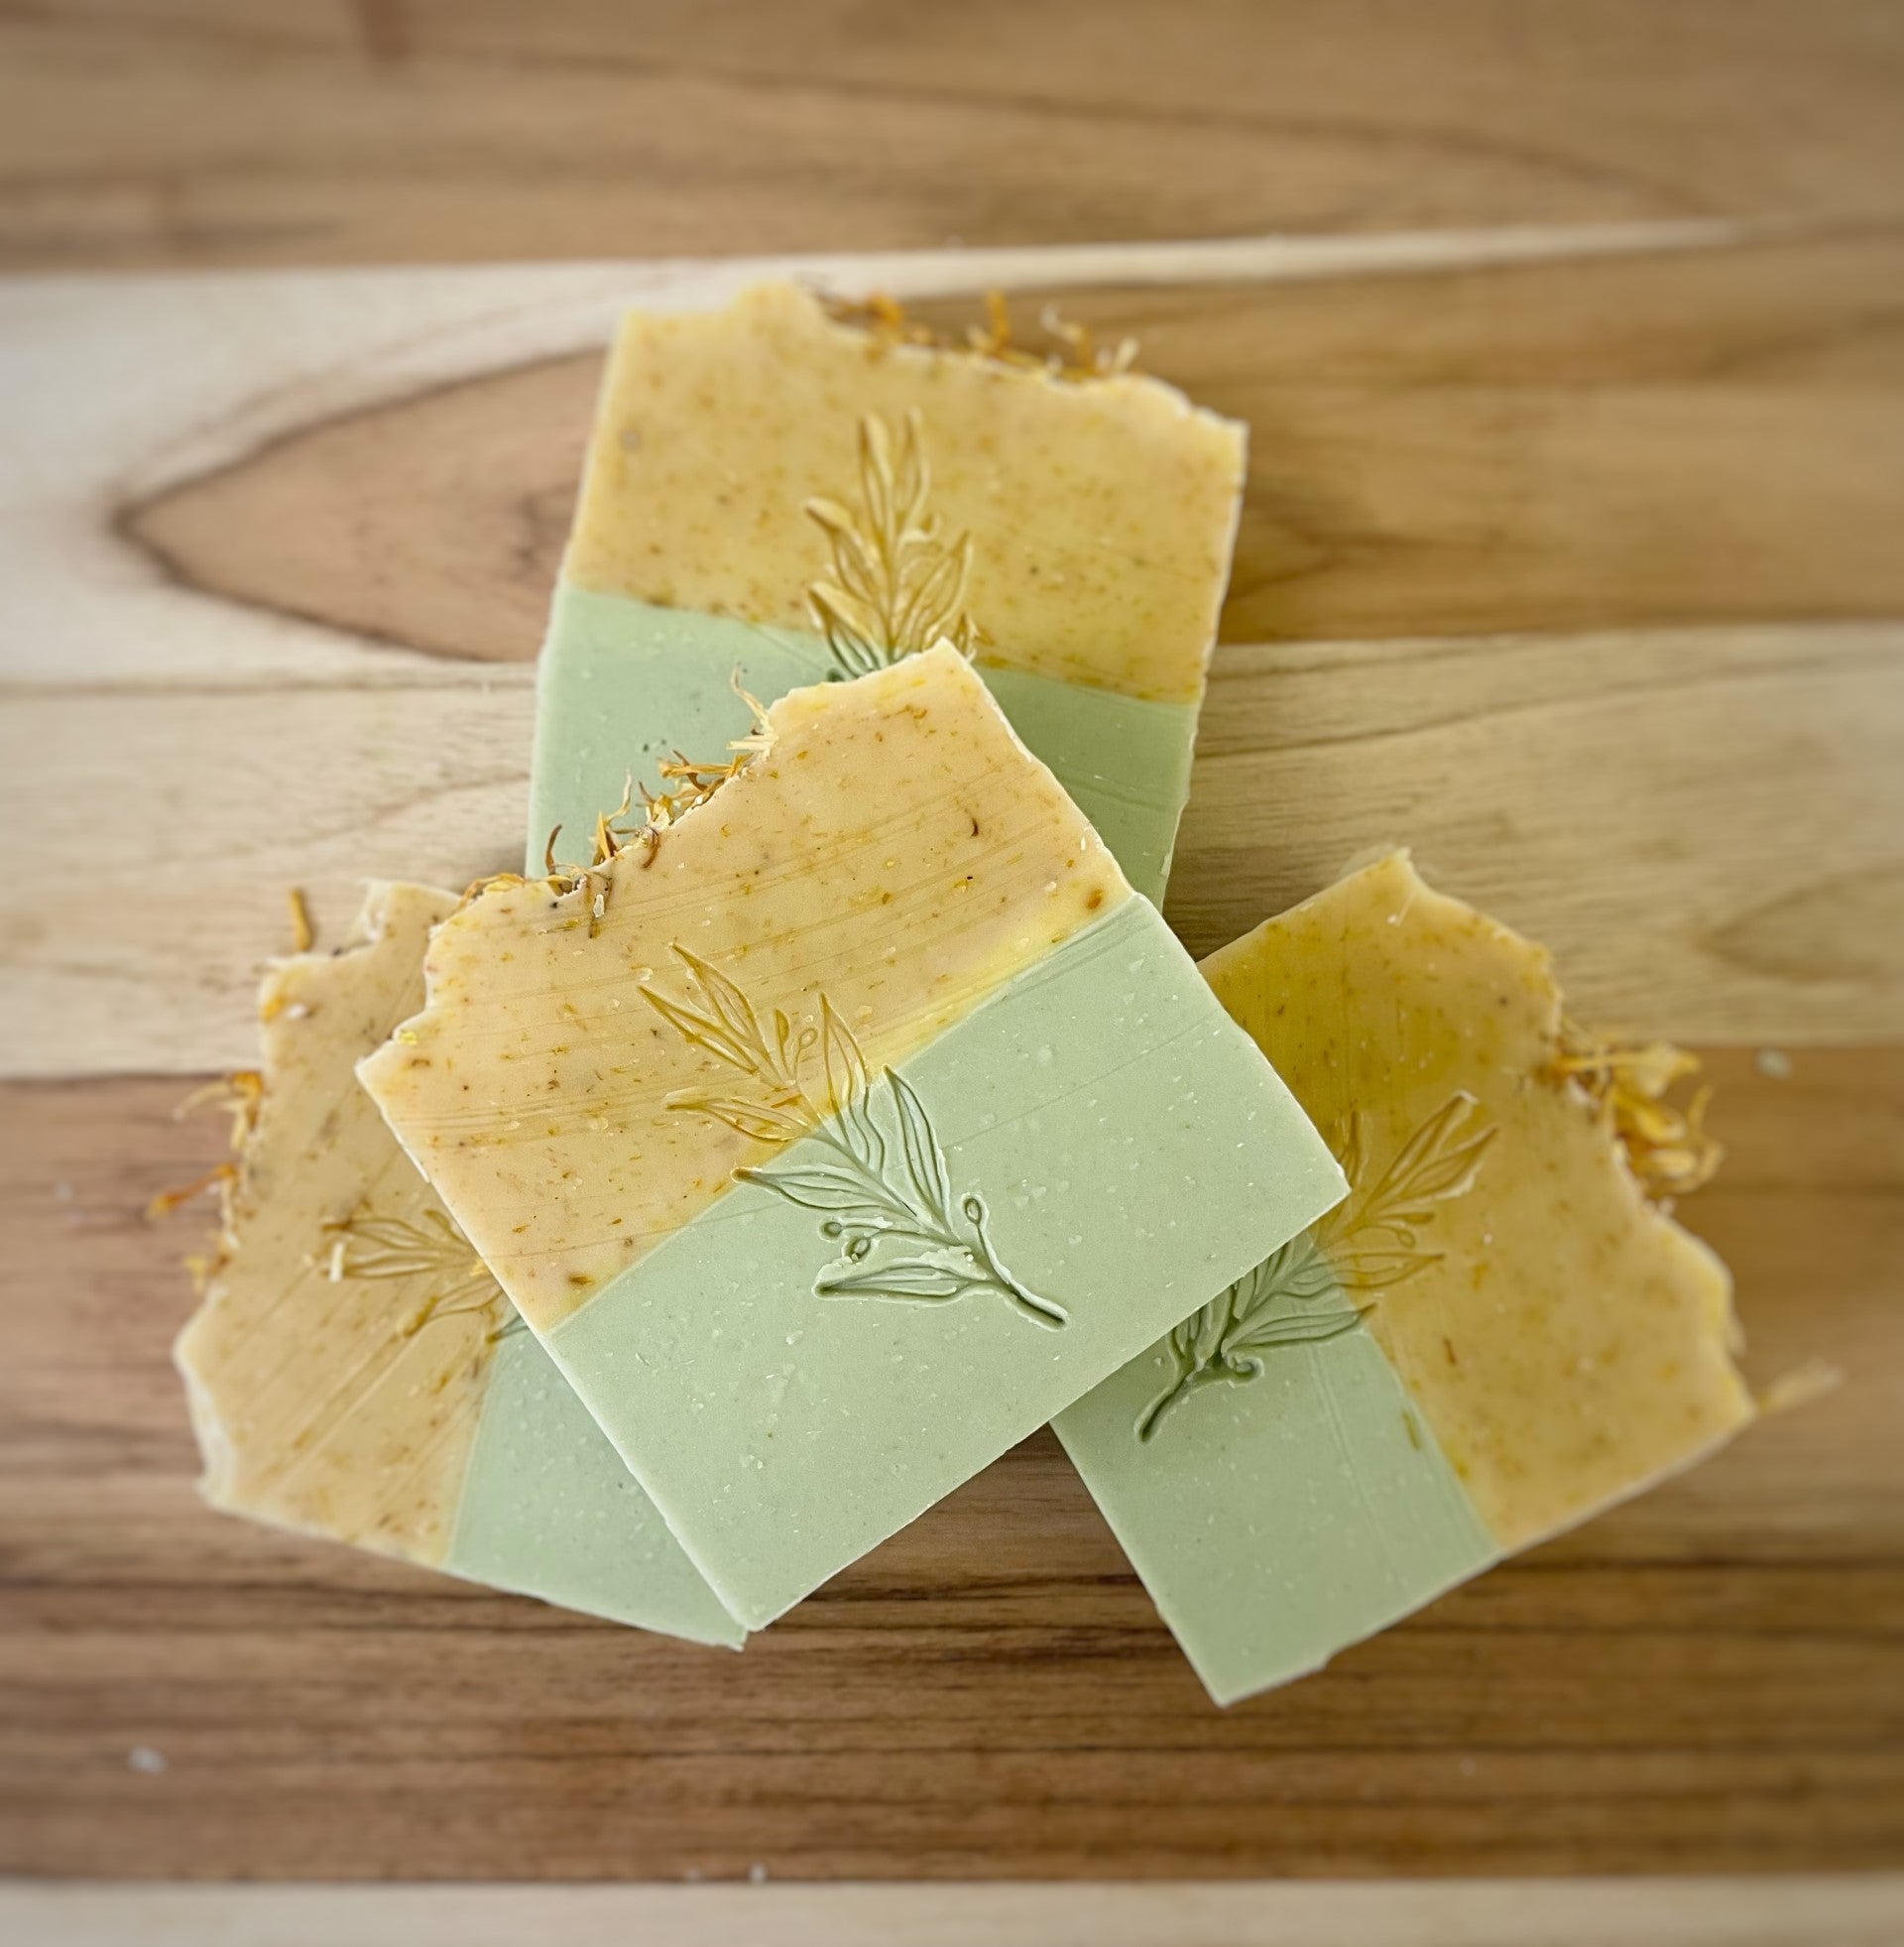 Artisanal handmade soaps with natural herbs, elegantly displayed on a wooden surface.